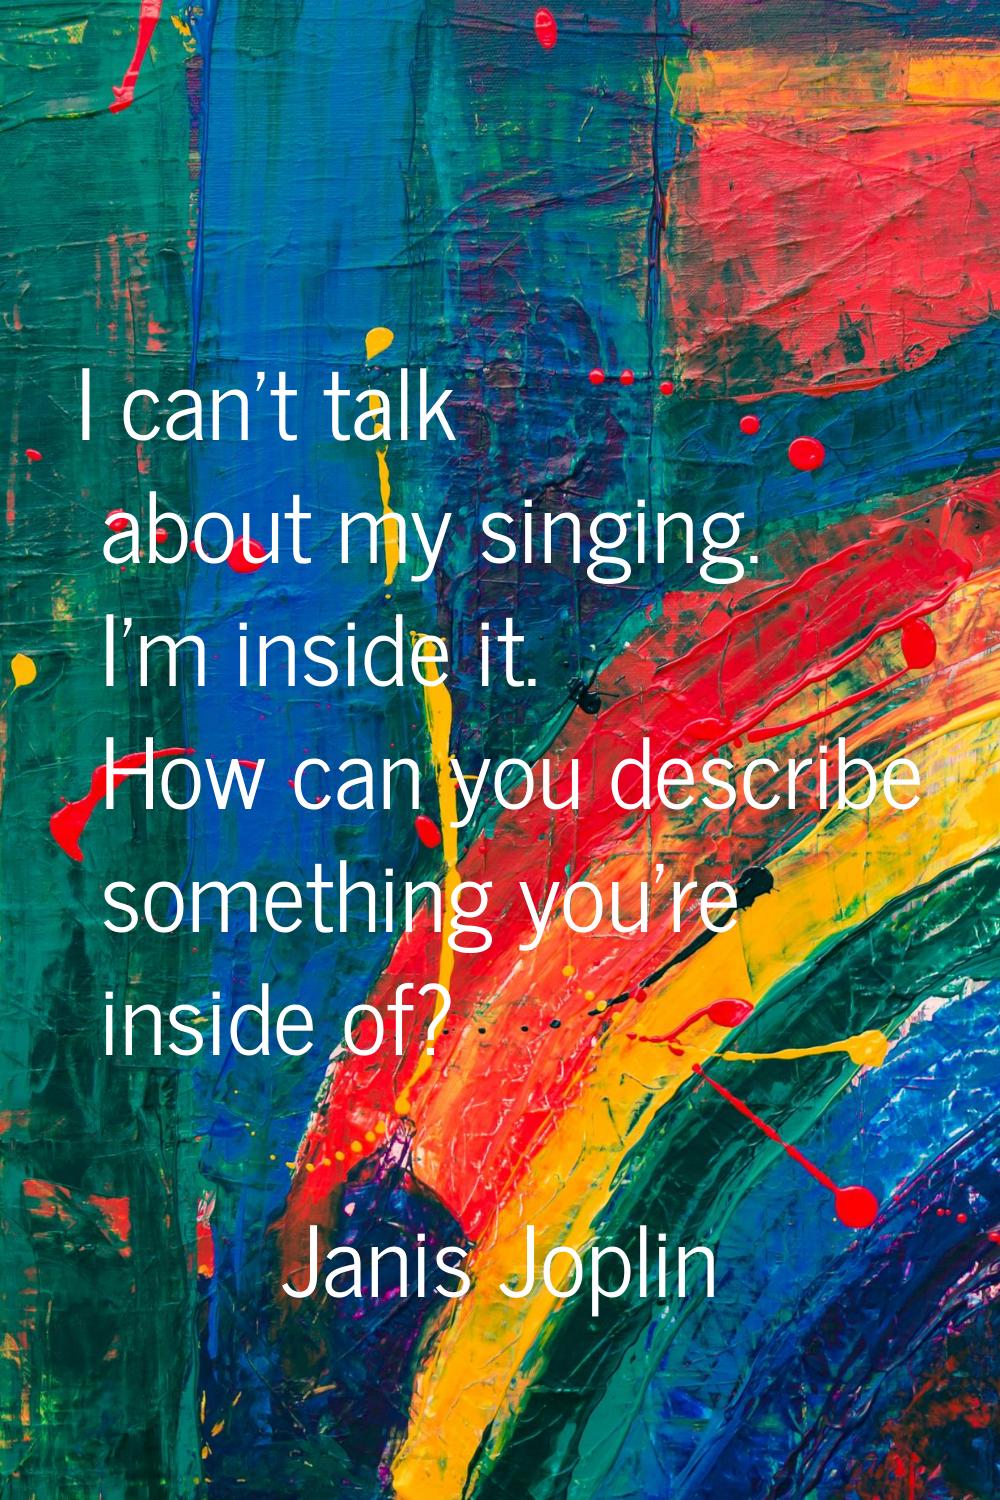 I can't talk about my singing. I'm inside it. How can you describe something you're inside of?